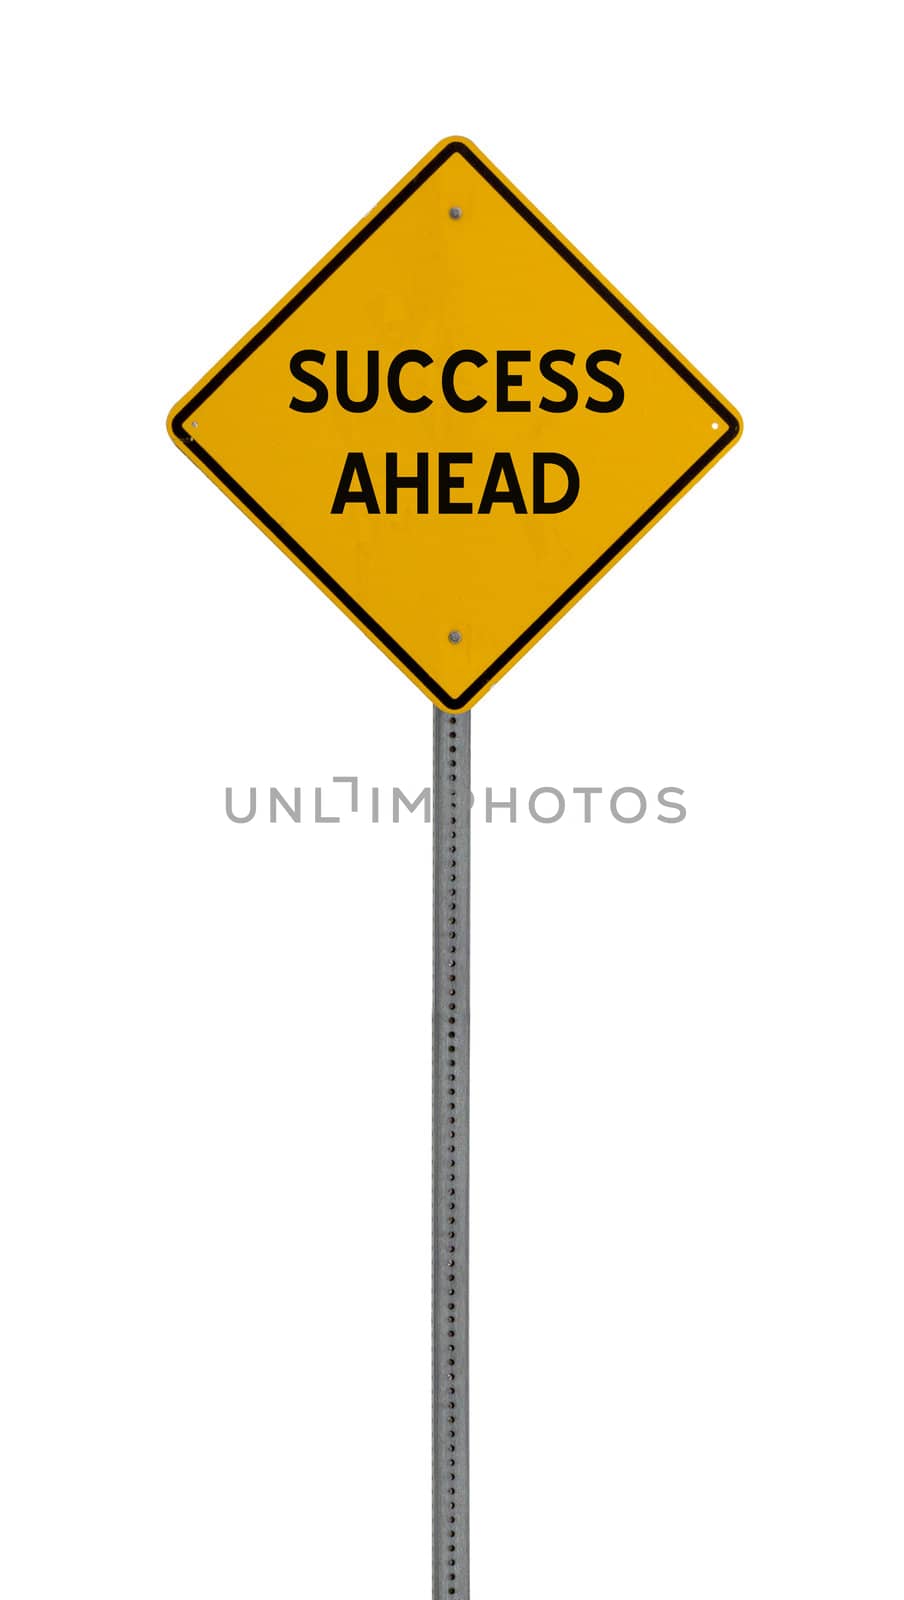 success ahead - Yellow road warning sign by jeremywhat